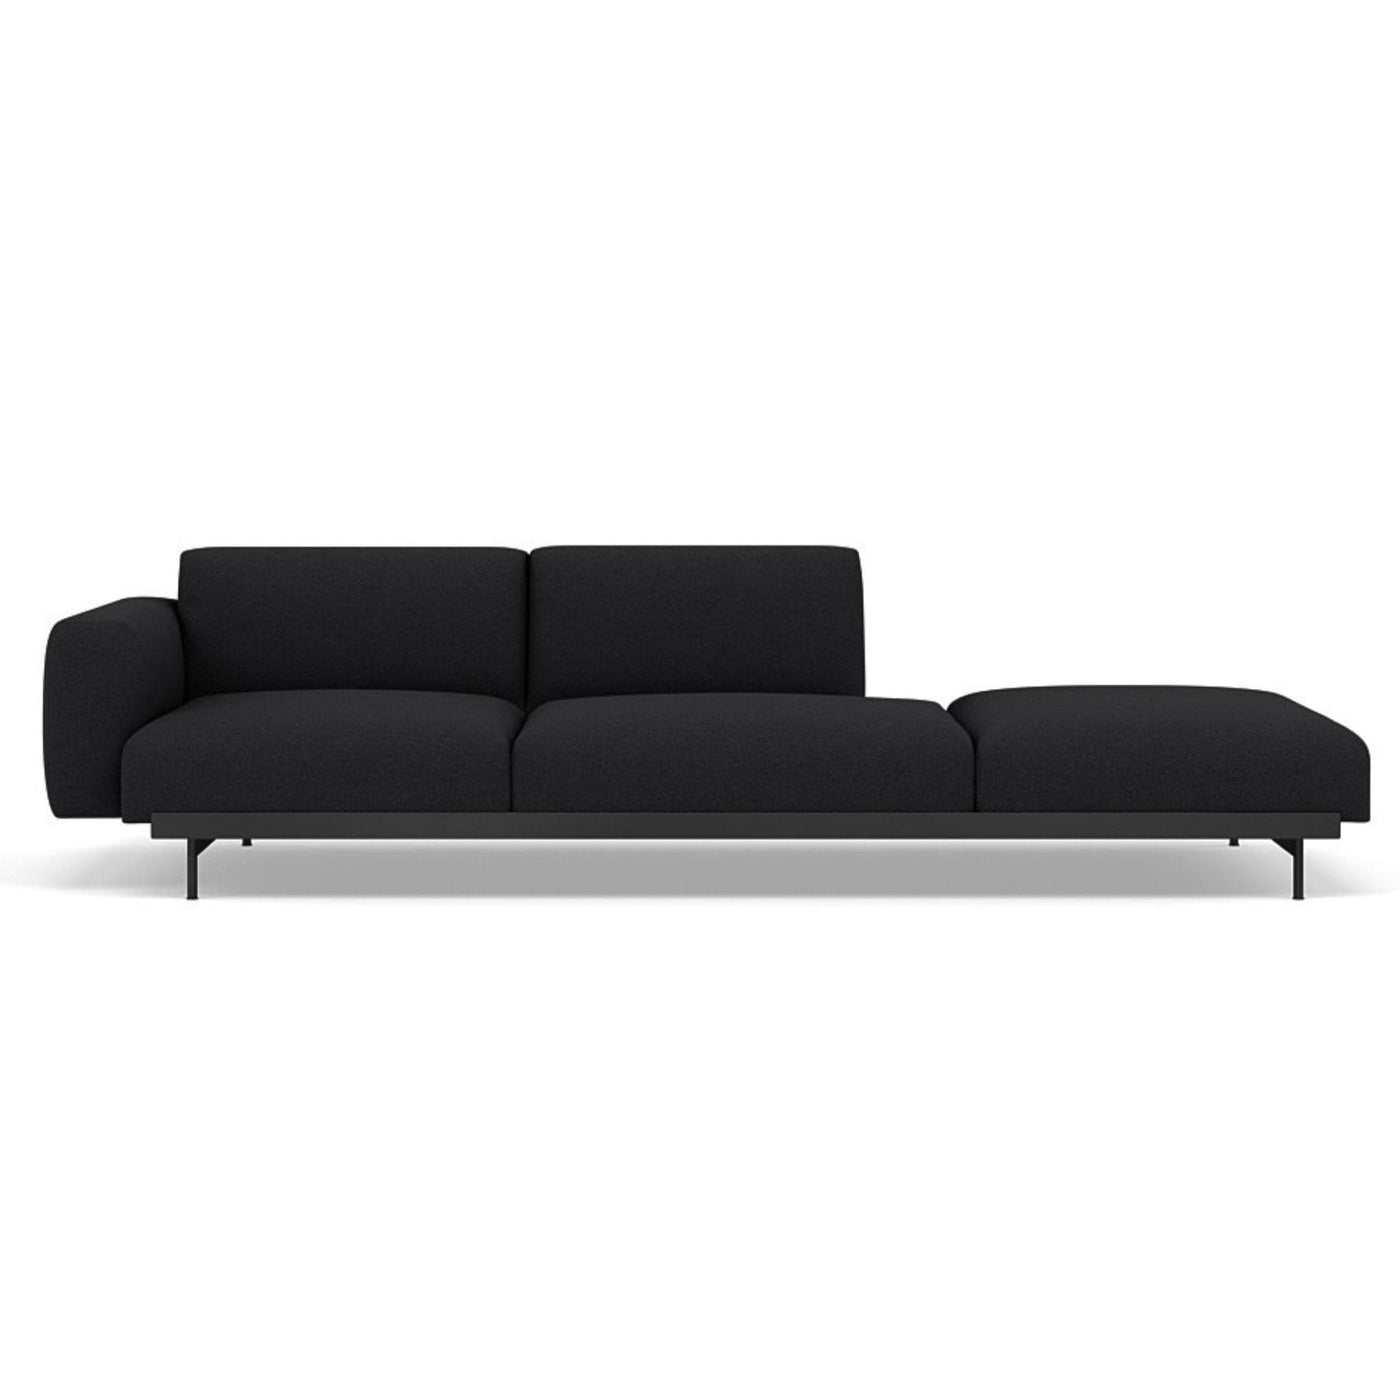 Muuto In Situ Modular 3 Seater Sofa, configuration 5. Made to order from someday designs. #colour_divina-md-193